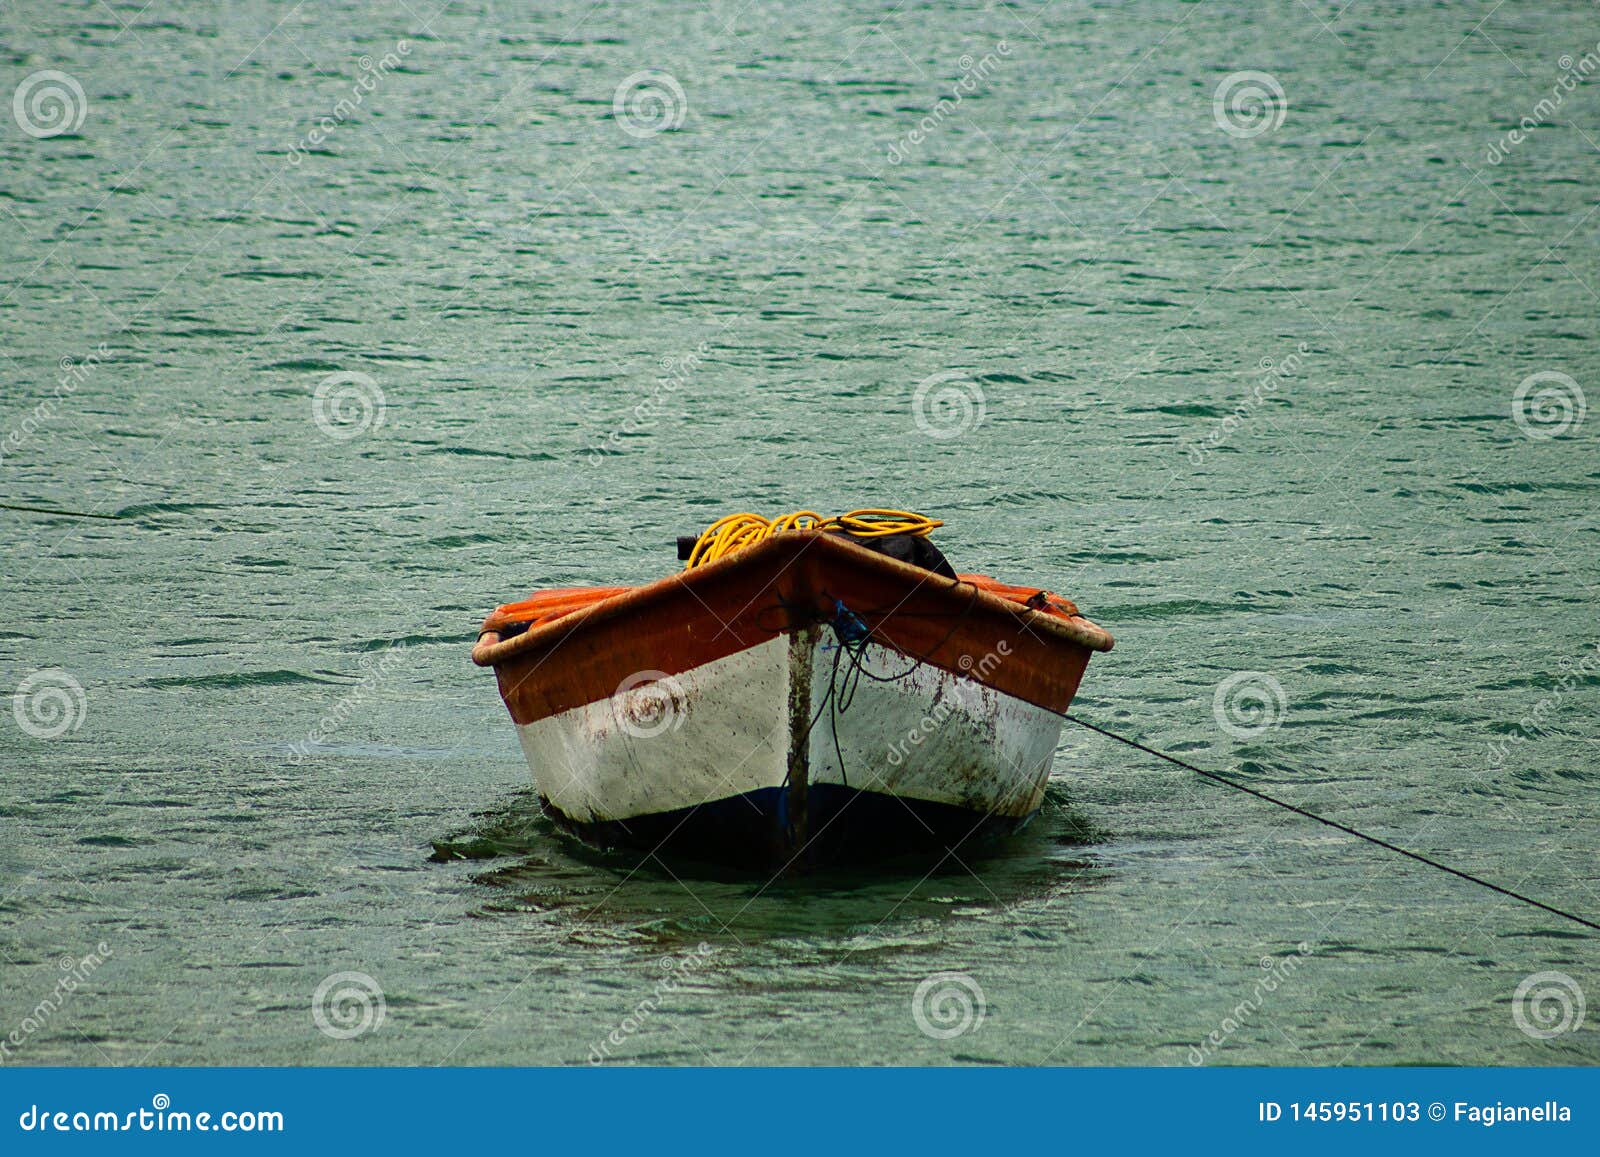 tropical paradise typical scenery: colored wooden boats docked in the sea. miches bay or sabana de la mar lagoon, northern